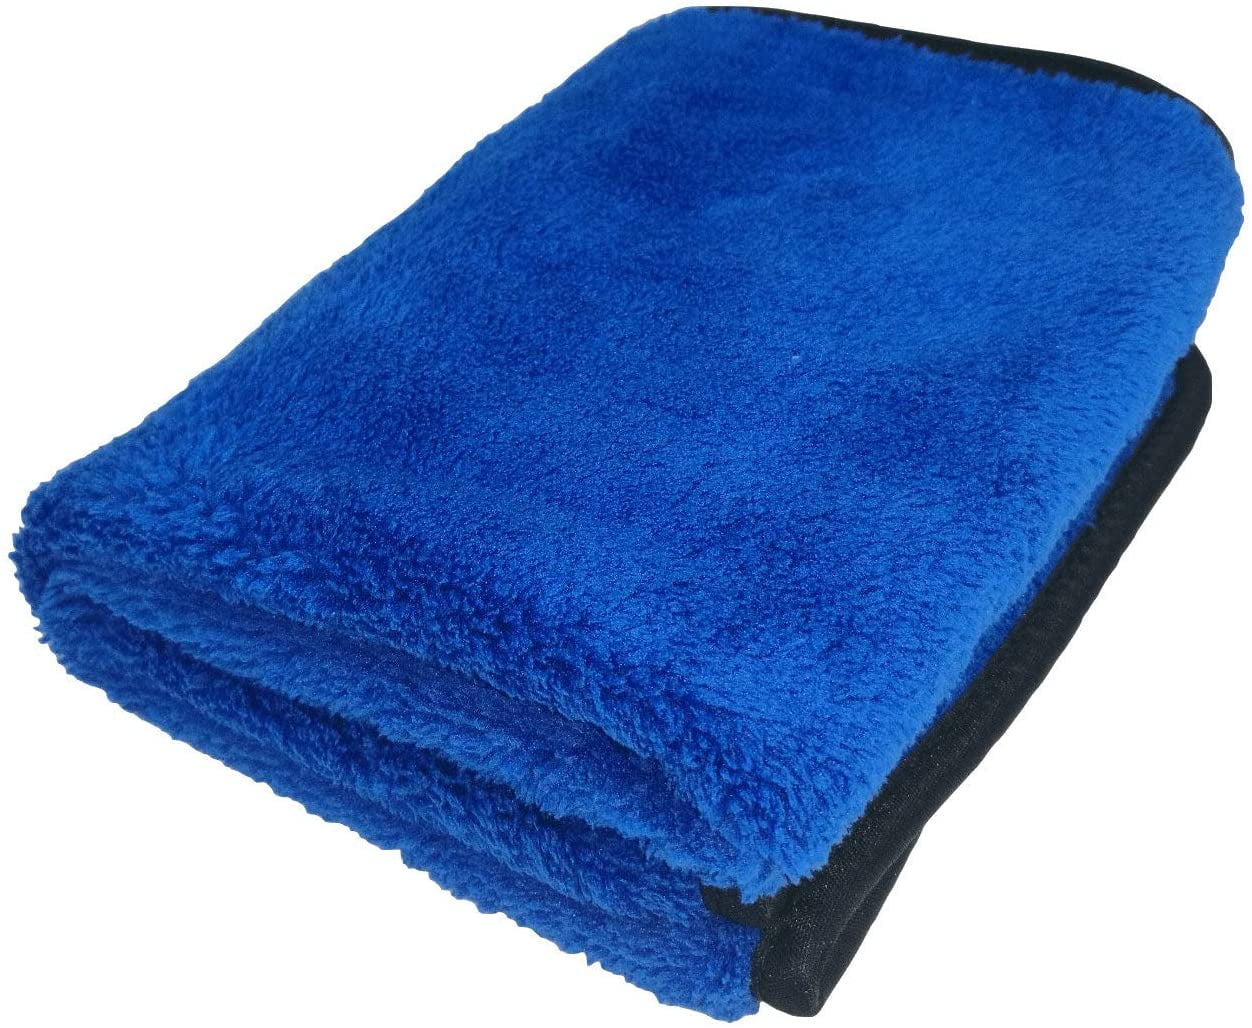  Dialed Drying Towel 1600 GSM, Dialed Drying Towel, Microfiber  Car Wash Drying Towel, Dialed Car Care Drying Towel, Microfiber Towels for  Cars, Car Towels Drying (35 * 75cm, Blue) : Automotive